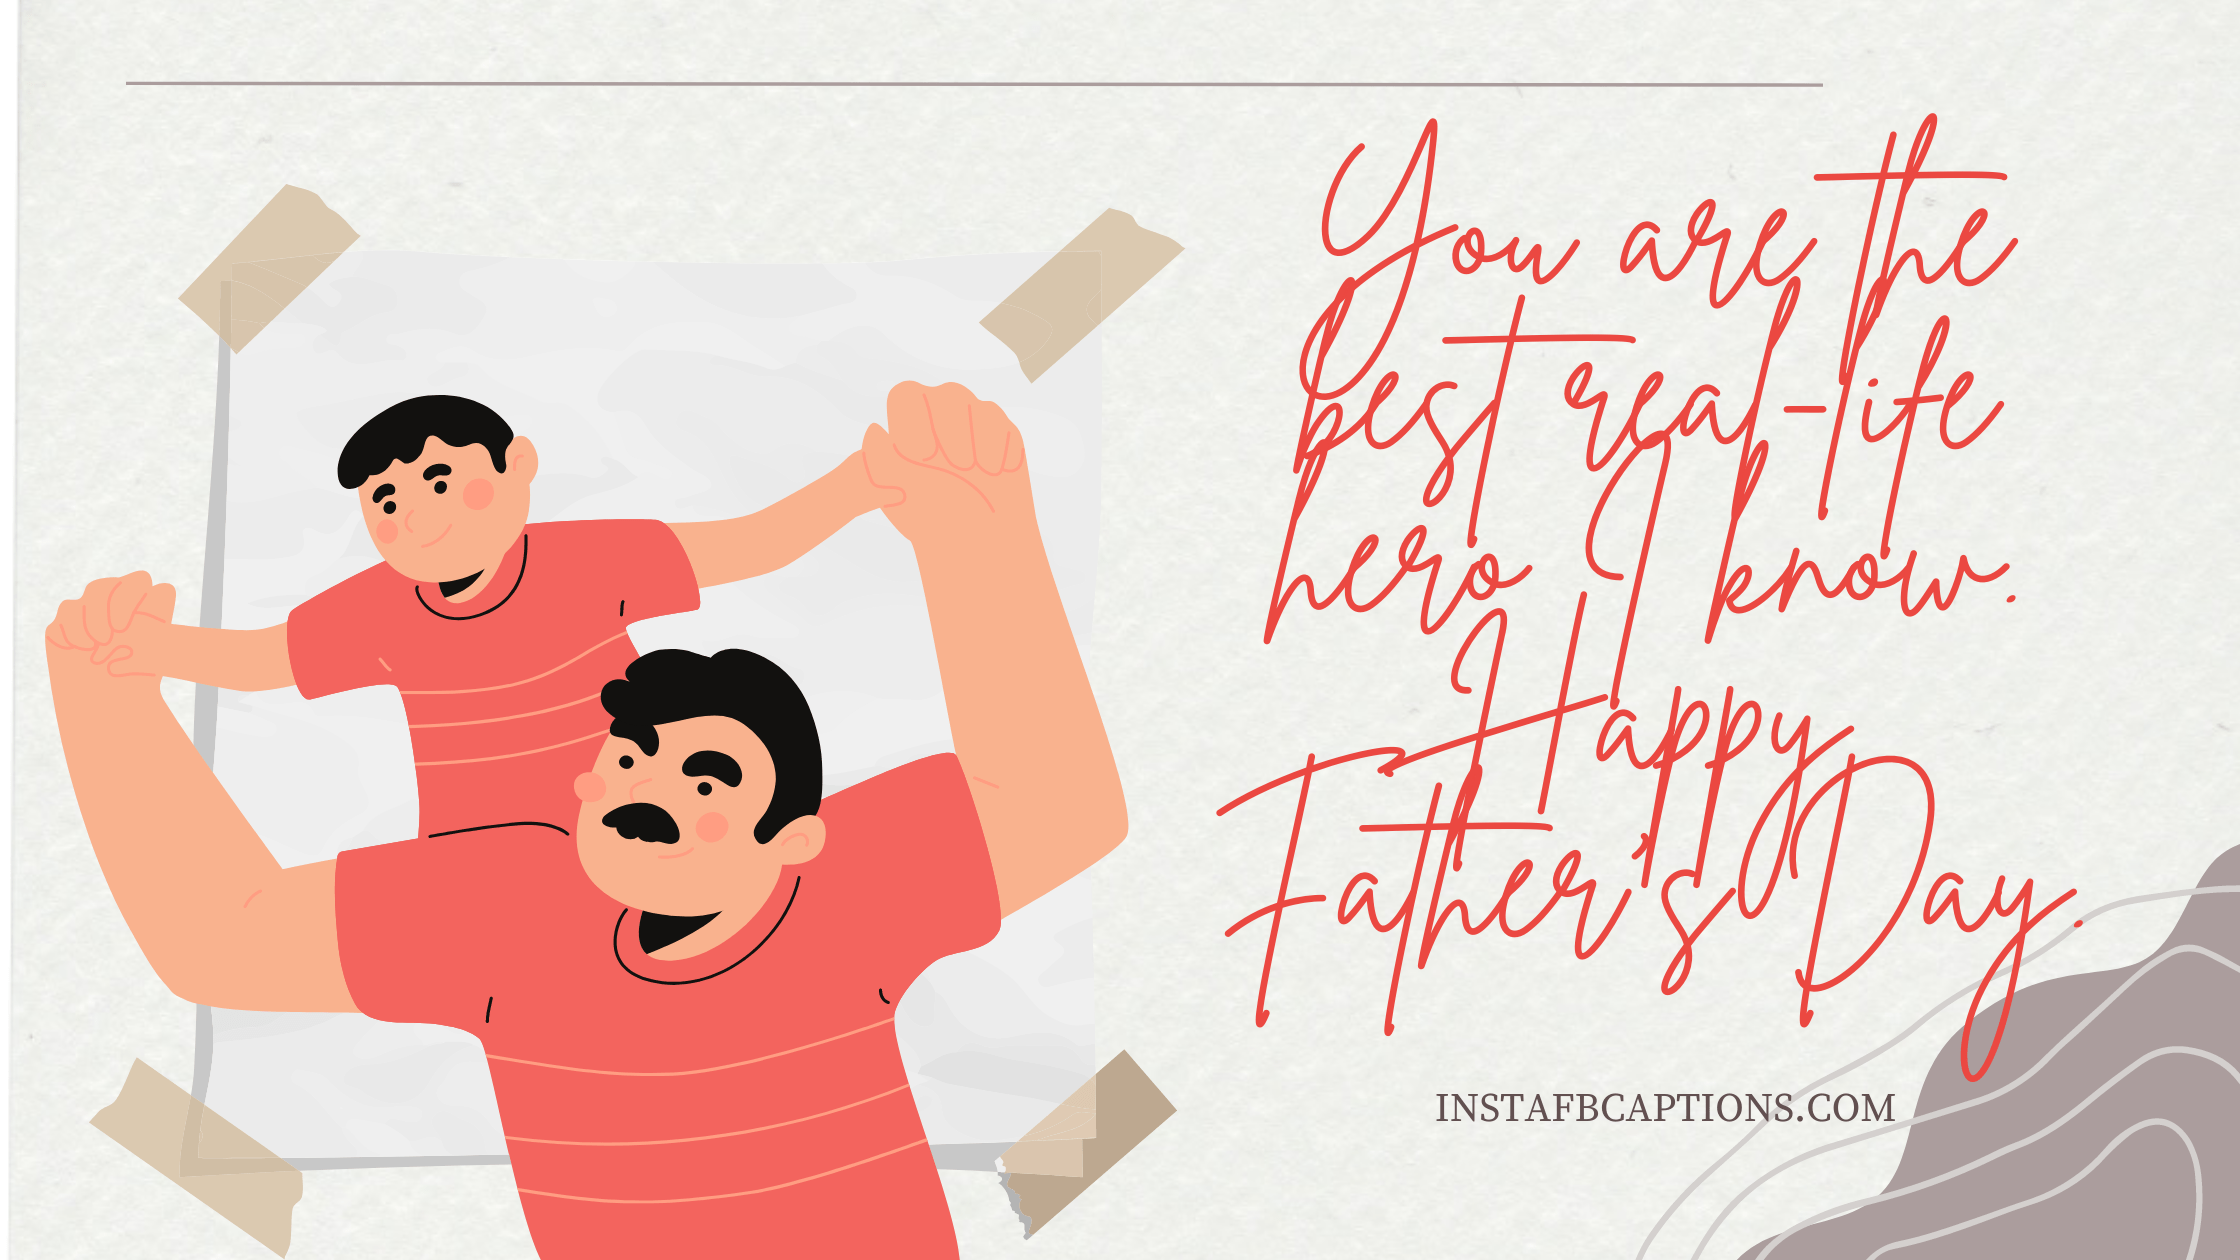 You are the best real-life hero I know. Happy Father’s Day father's day instagram captions - Captions for Your Sweet Father - 110+ Perfect Father&#8217;s Day Captions And Quotes for Instagram &#8211; 2022